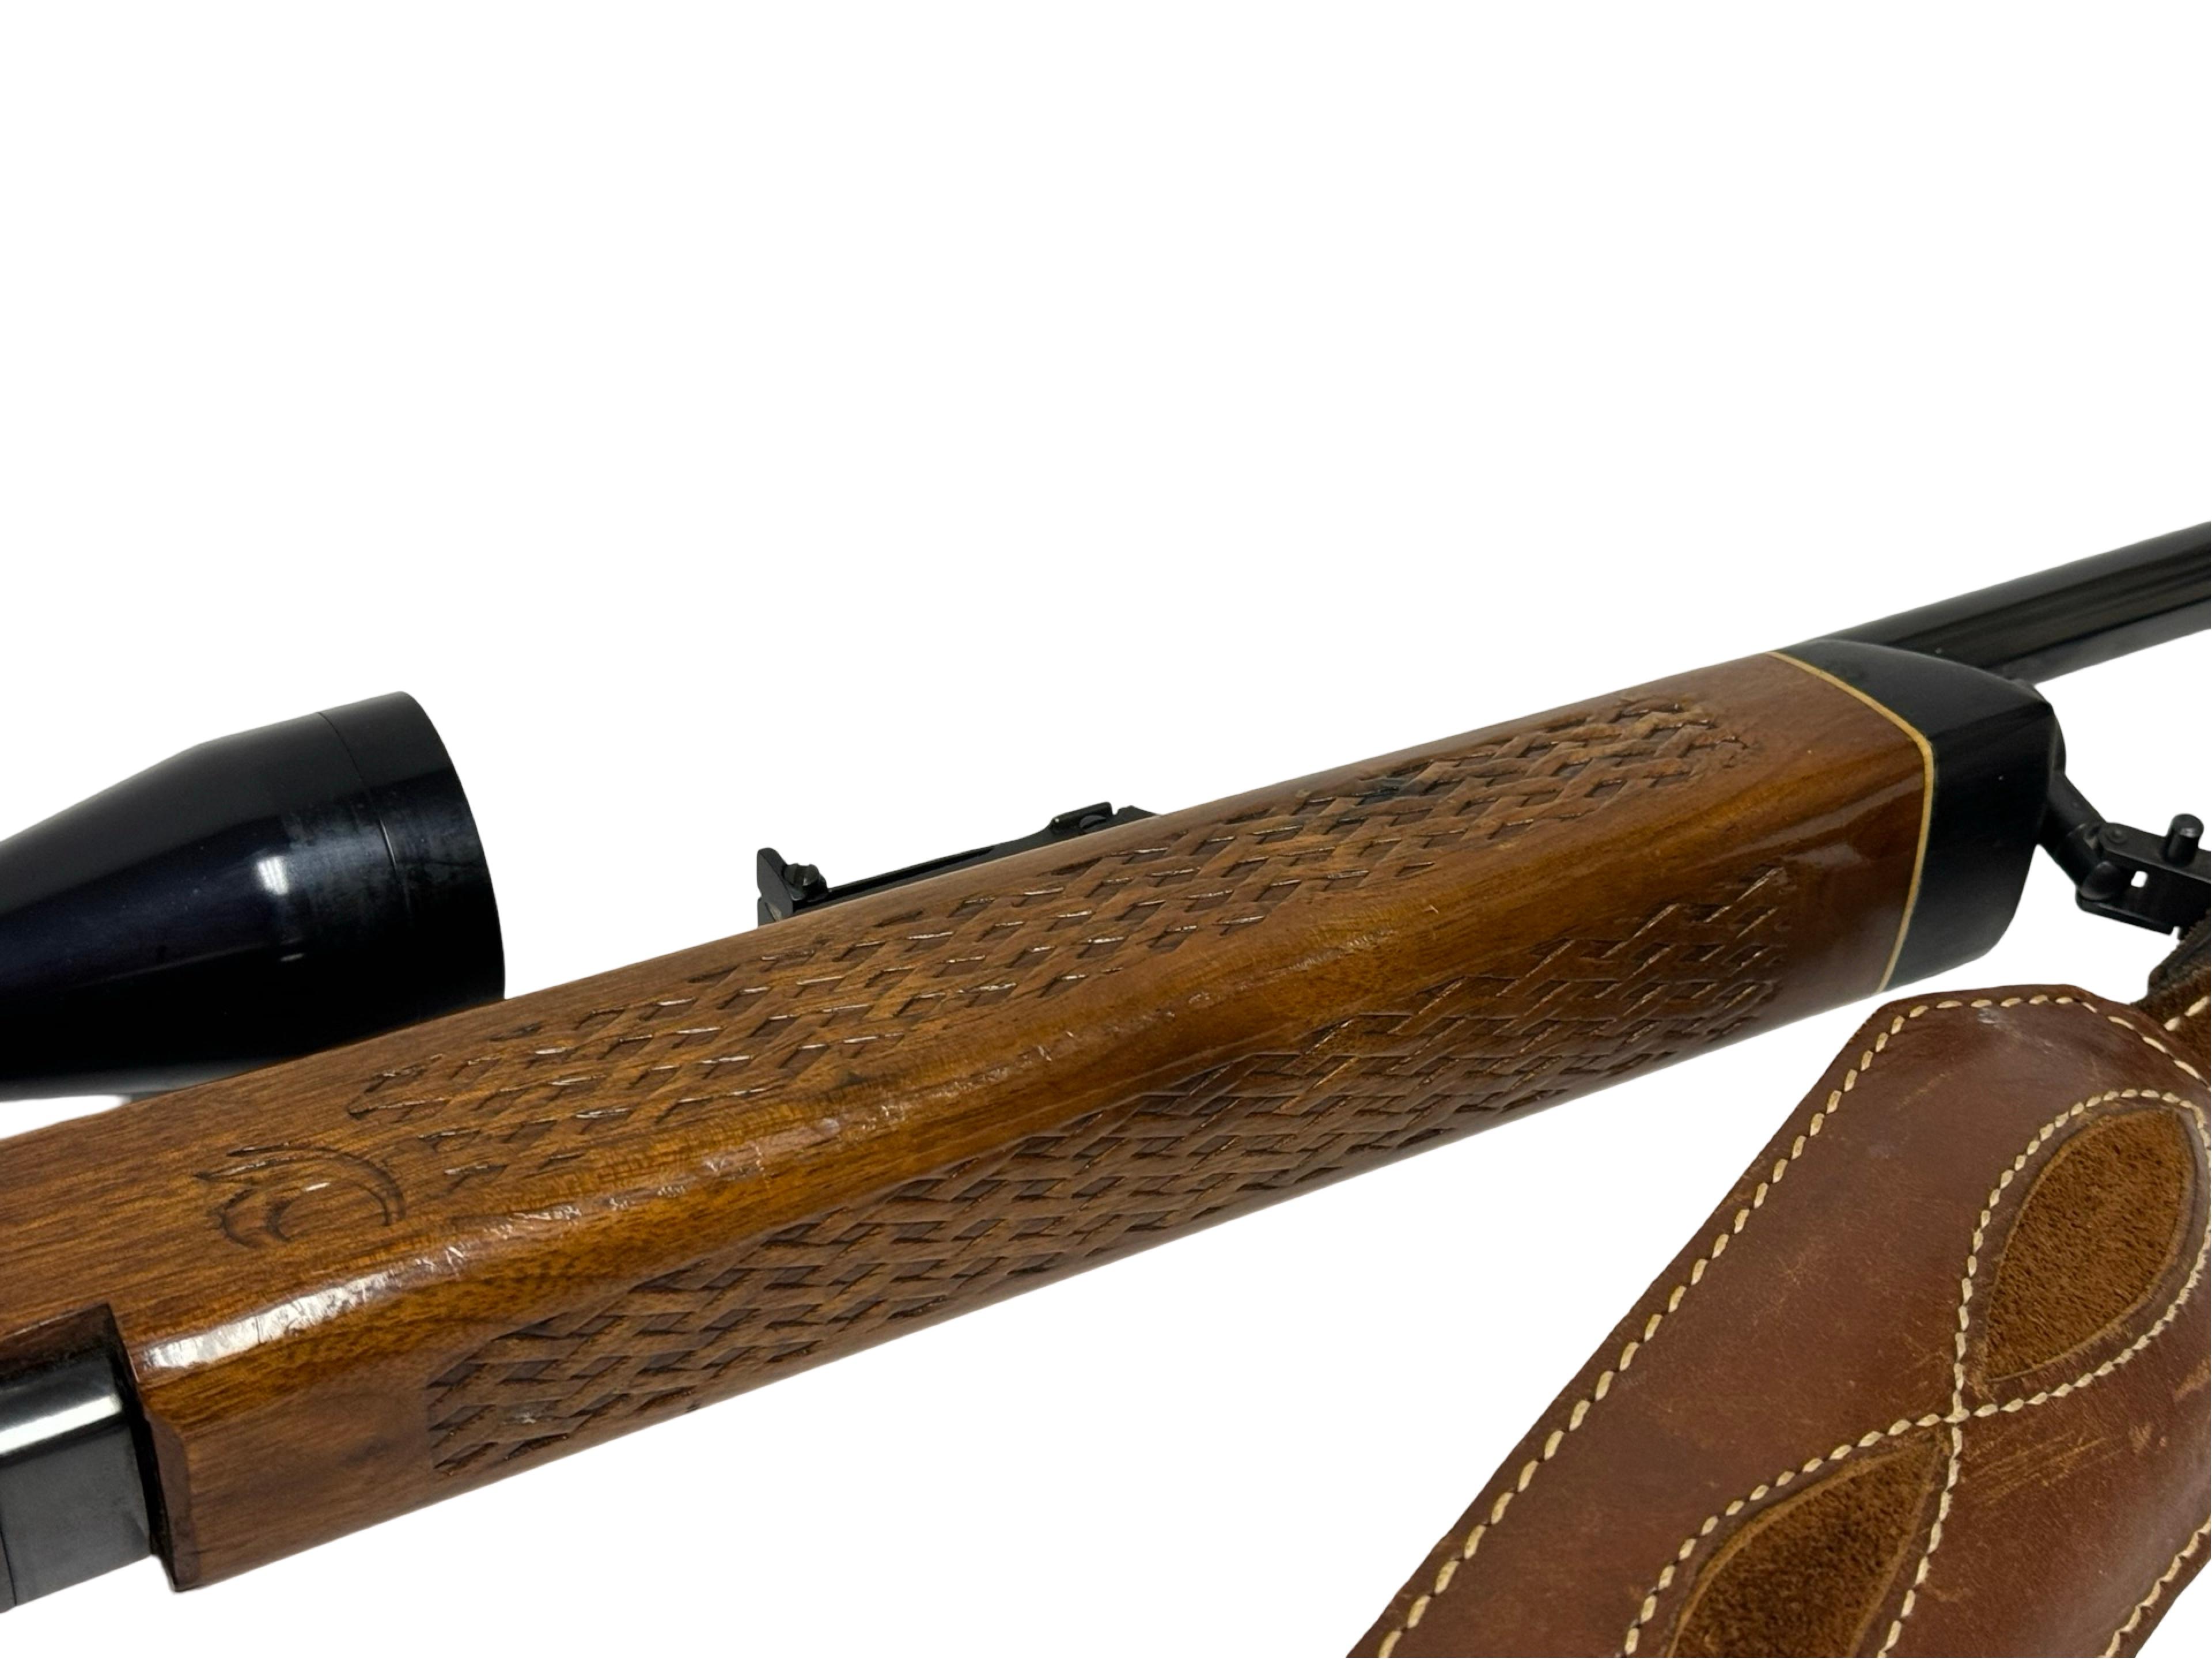 Excellent 1970 Woodsmaster Model 742 BDL Deluxe Semi-Automatic .30-06 SPRG Magazine Rifle with Scope